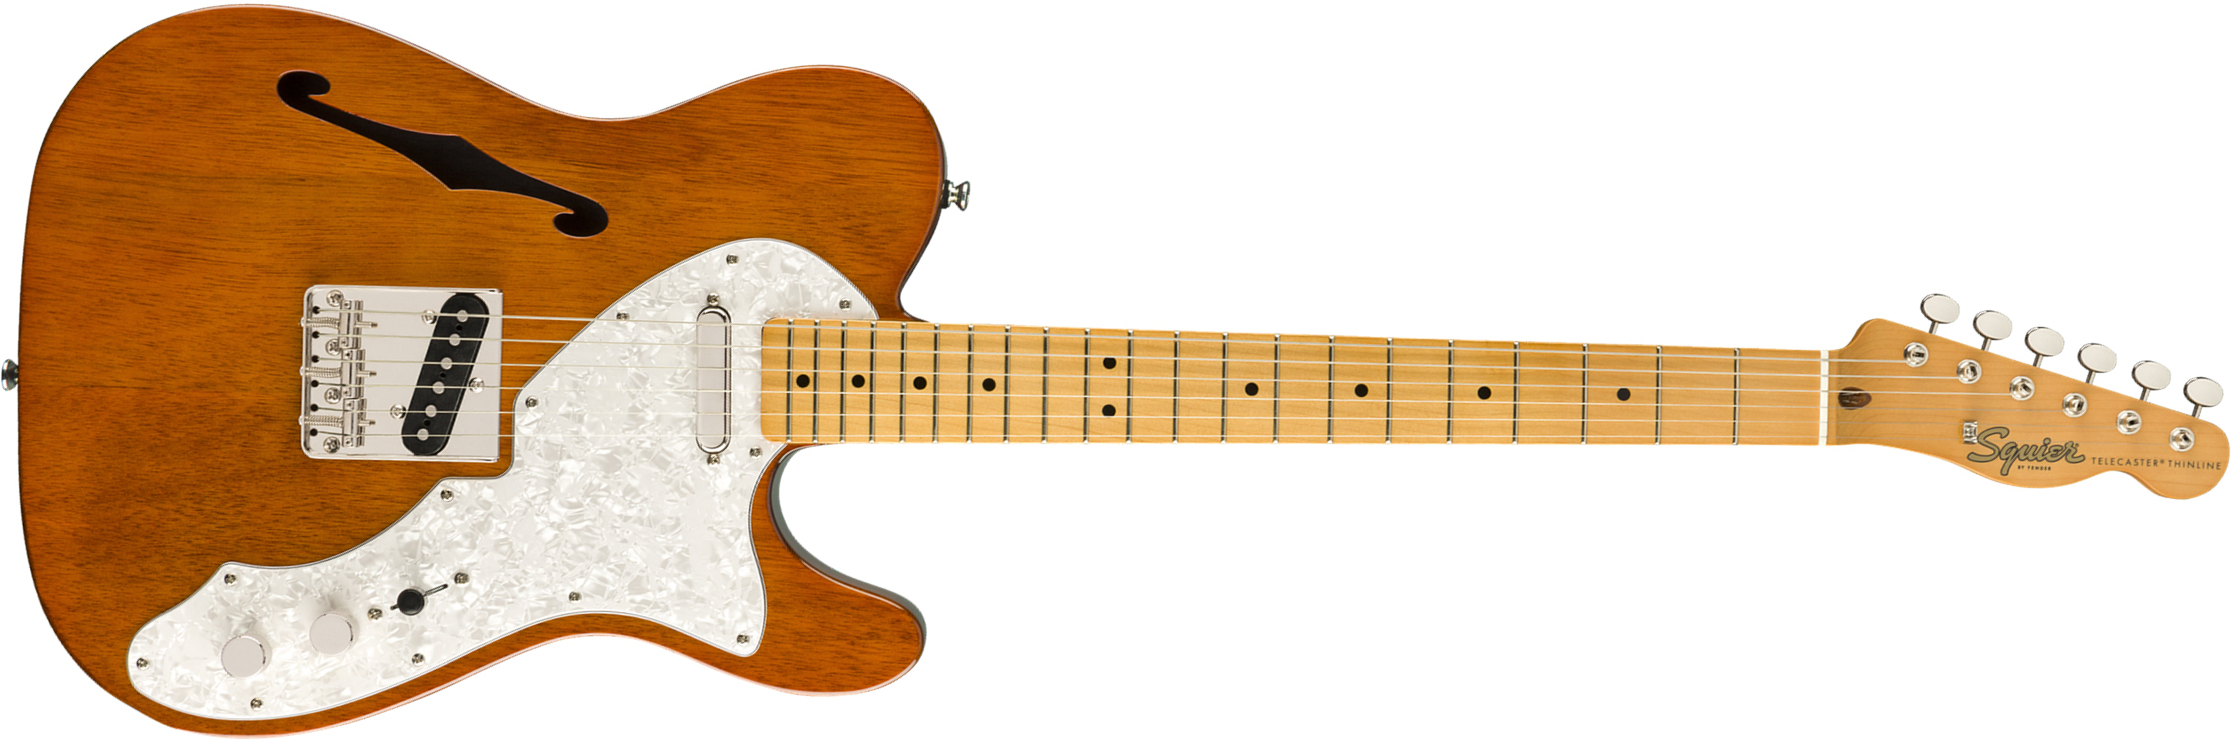 Squier Tele '60s Thinline Classic Vibe 2019 Mn - Natural - Semi-hollow electric guitar - Main picture